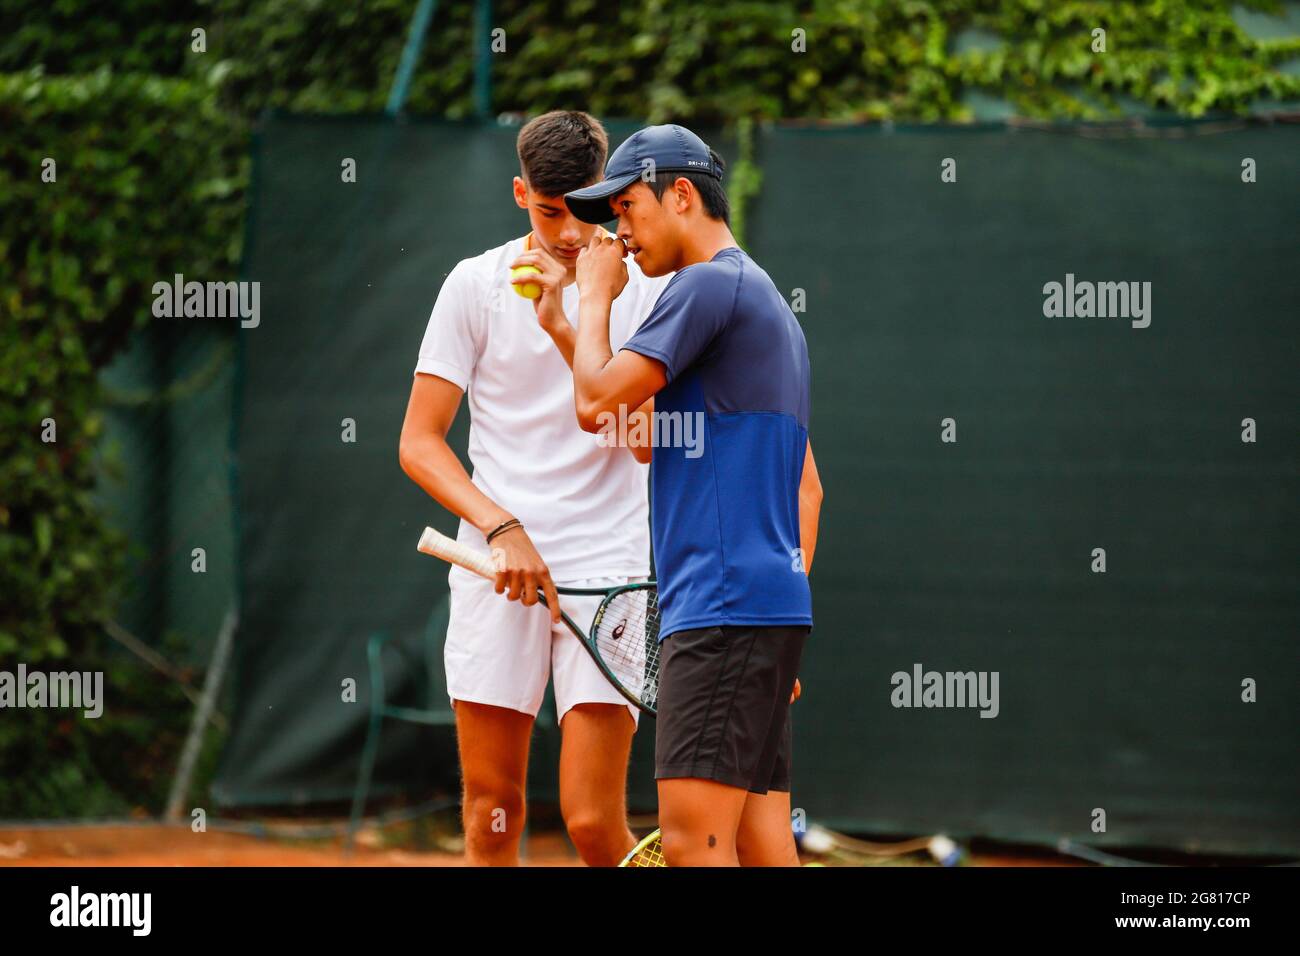 Milan, Italy. 16th July, 2021. Derrick CHEN (GBR)/Luka MIKRUT (CRO during  Bonfiglio Trophy 2021, Tennis Internationals in Milan, Italy, July 16 2021  Credit: Independent Photo Agency/Alamy Live News Stock Photo - Alamy